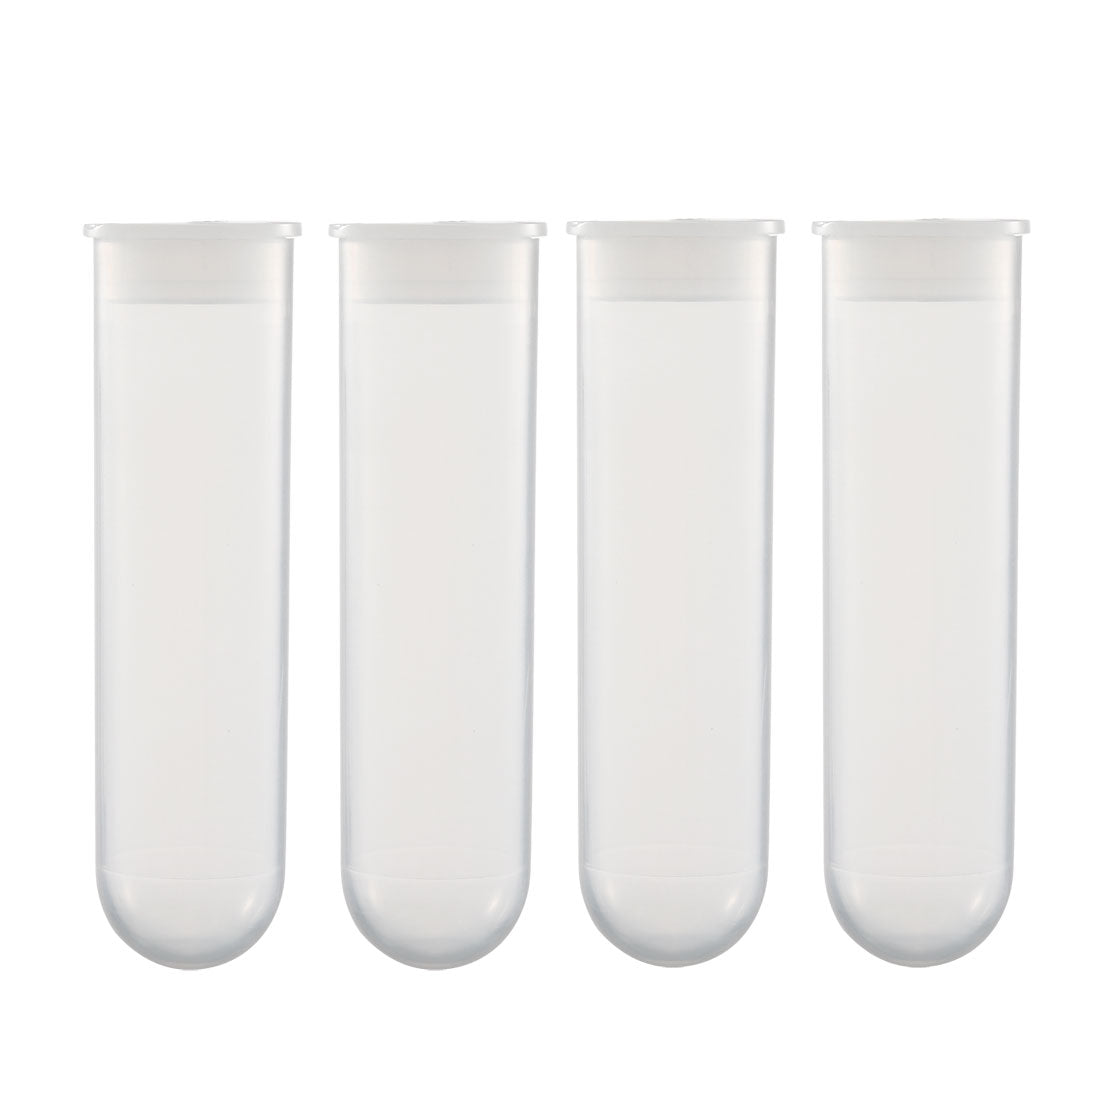 uxcell Uxcell 10 Pcs 50ml Plastic Centrifuge Tubes with Attached Cap, Round Bottom